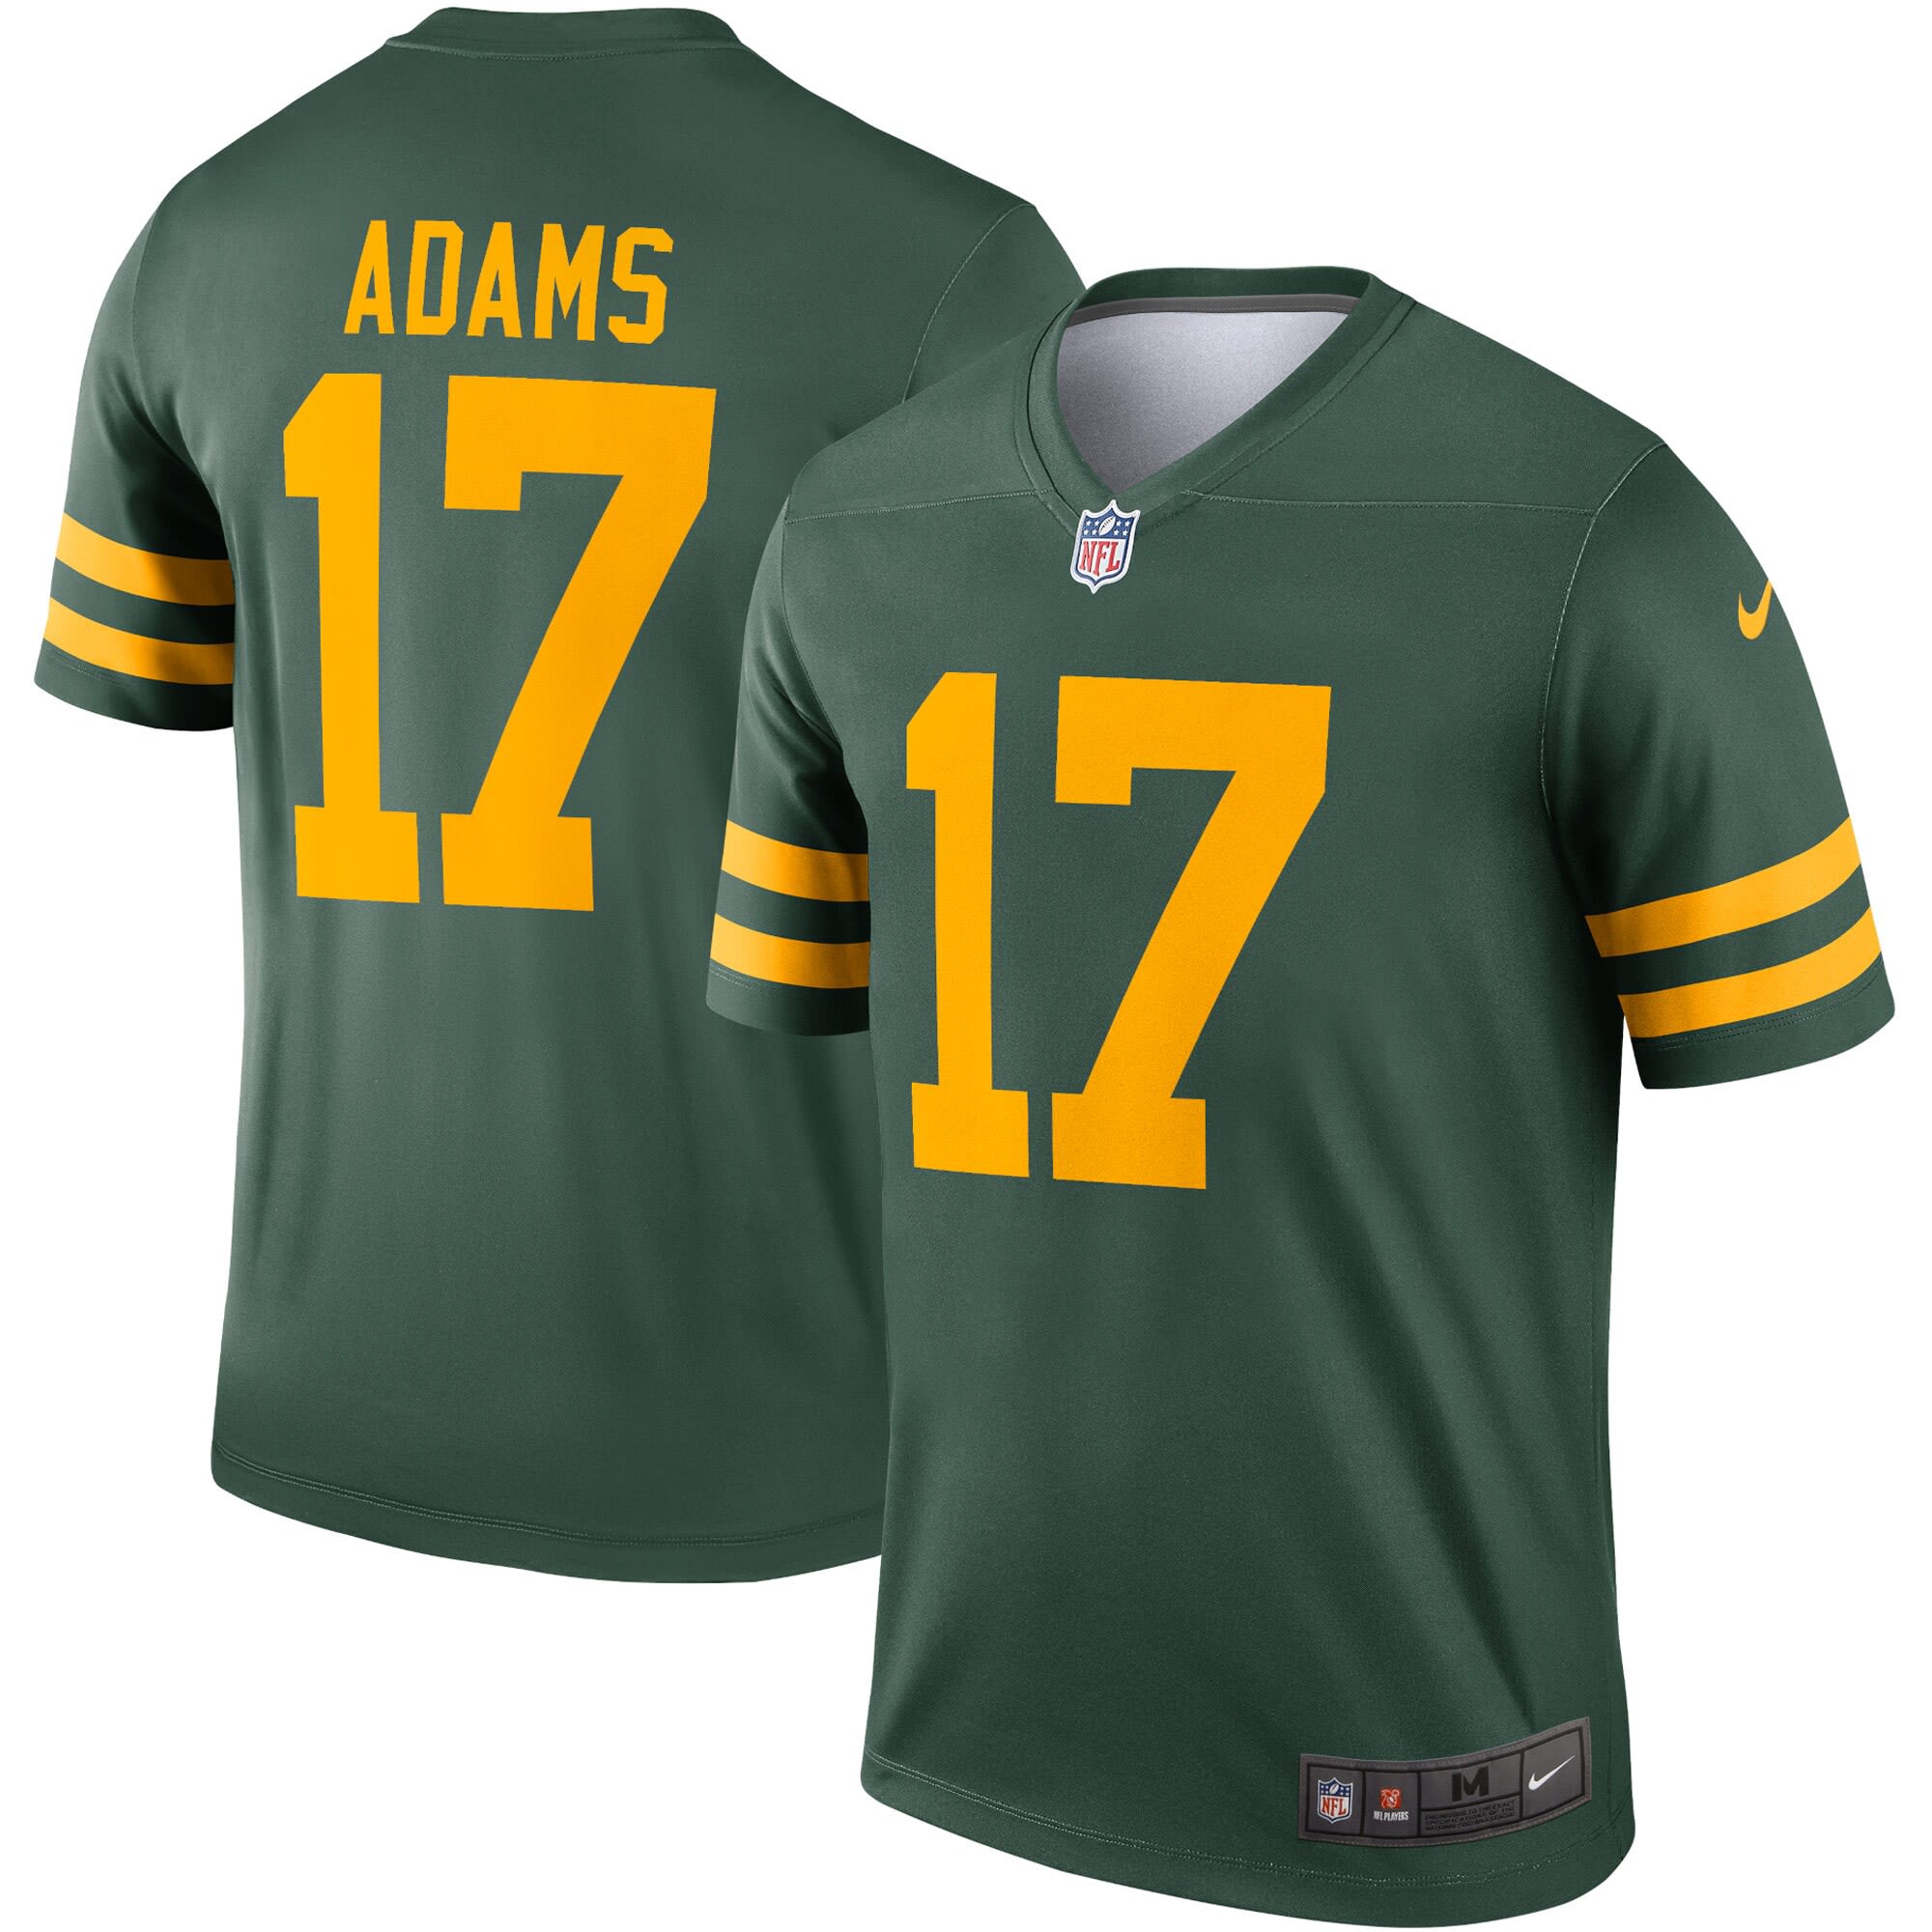 packers throwback jerseys for sale